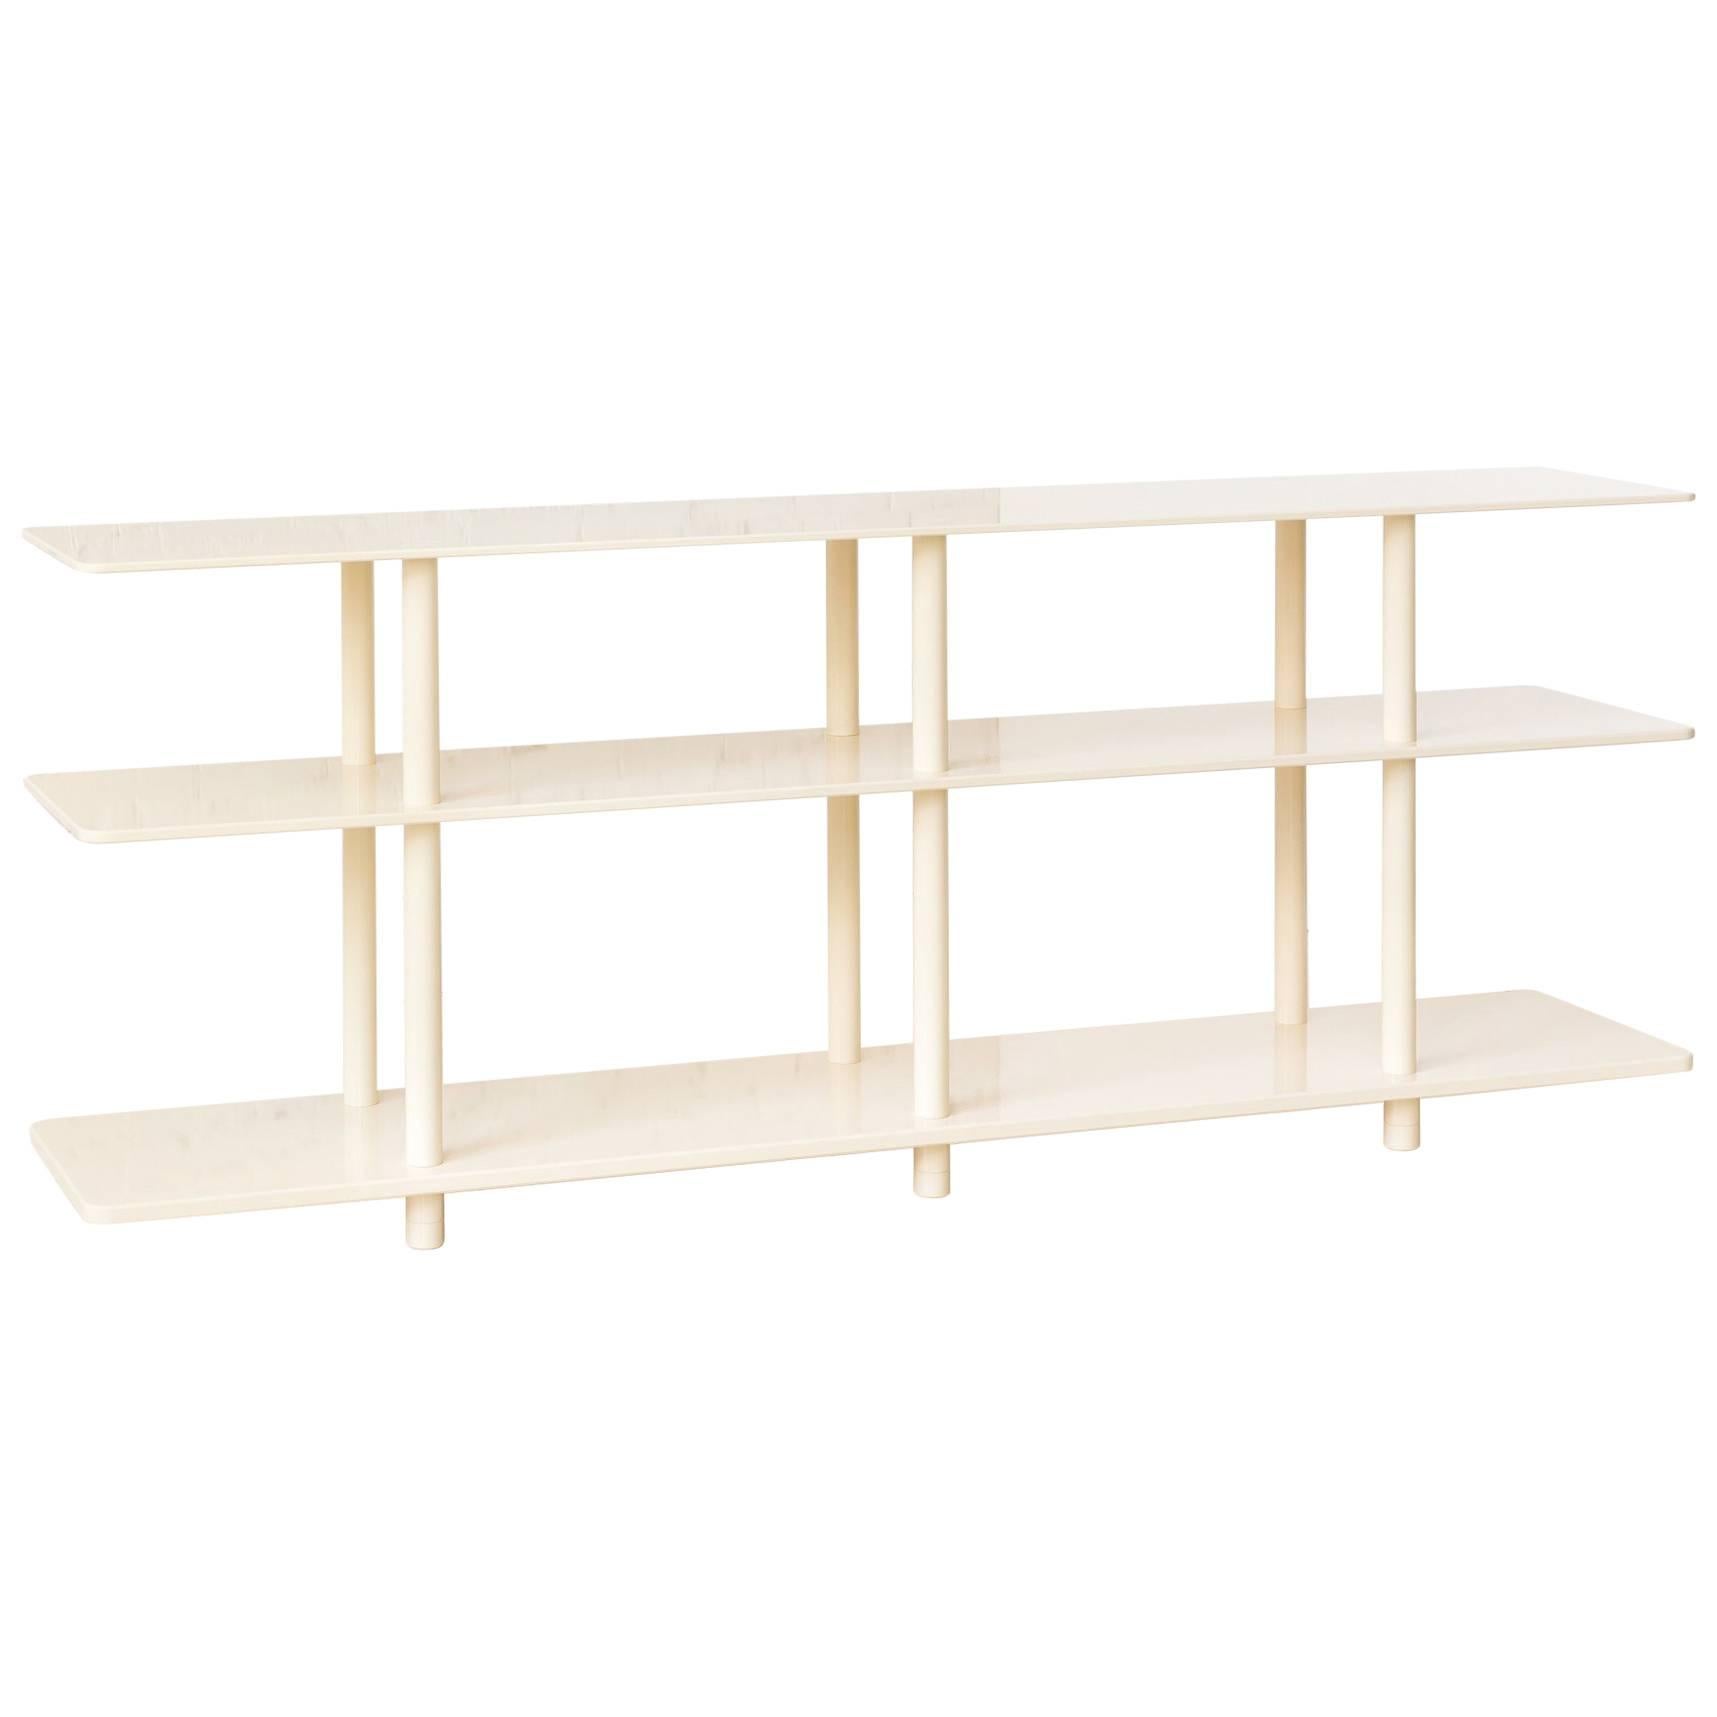 Strata Low Shelf in Powder Coated Aluminum by Fort Standard, in Stock